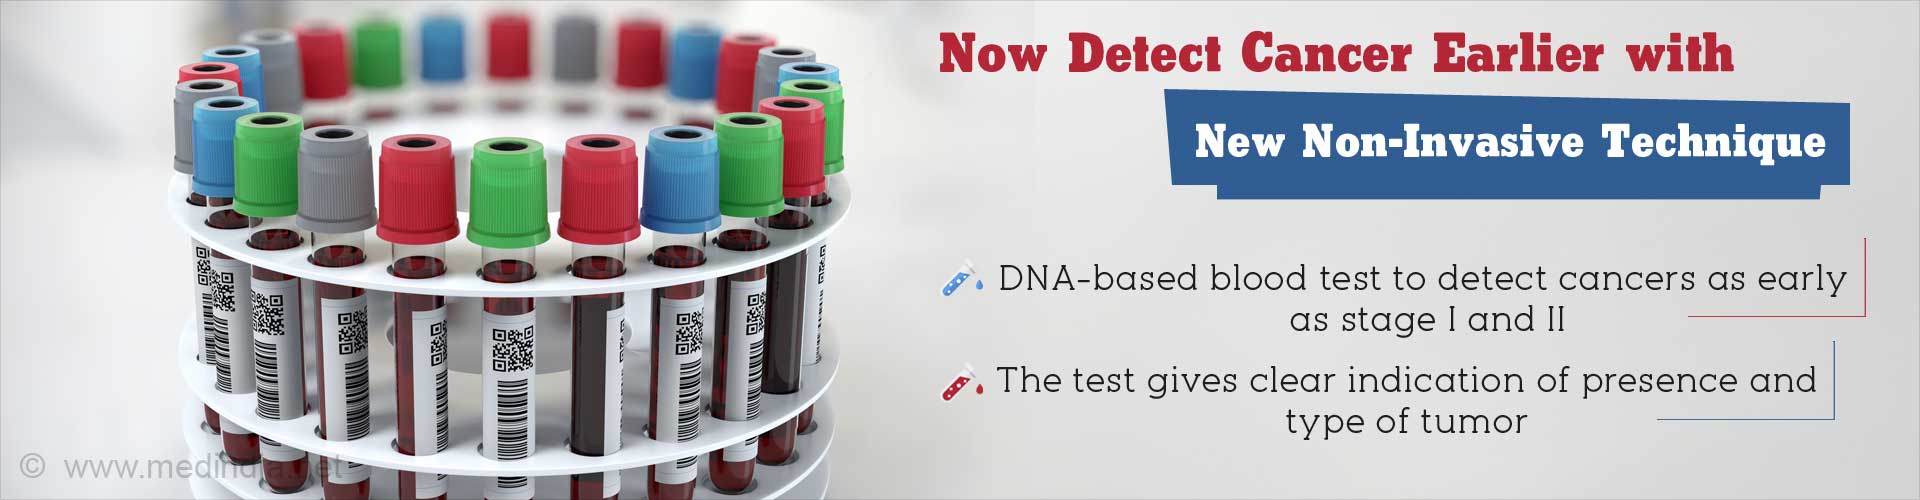 now detect cancer earlier with new non-invasive technique
- DNA-based blood test to detect cancers as early as stage I and II
- the test gives clear indication of presence and type of tumor